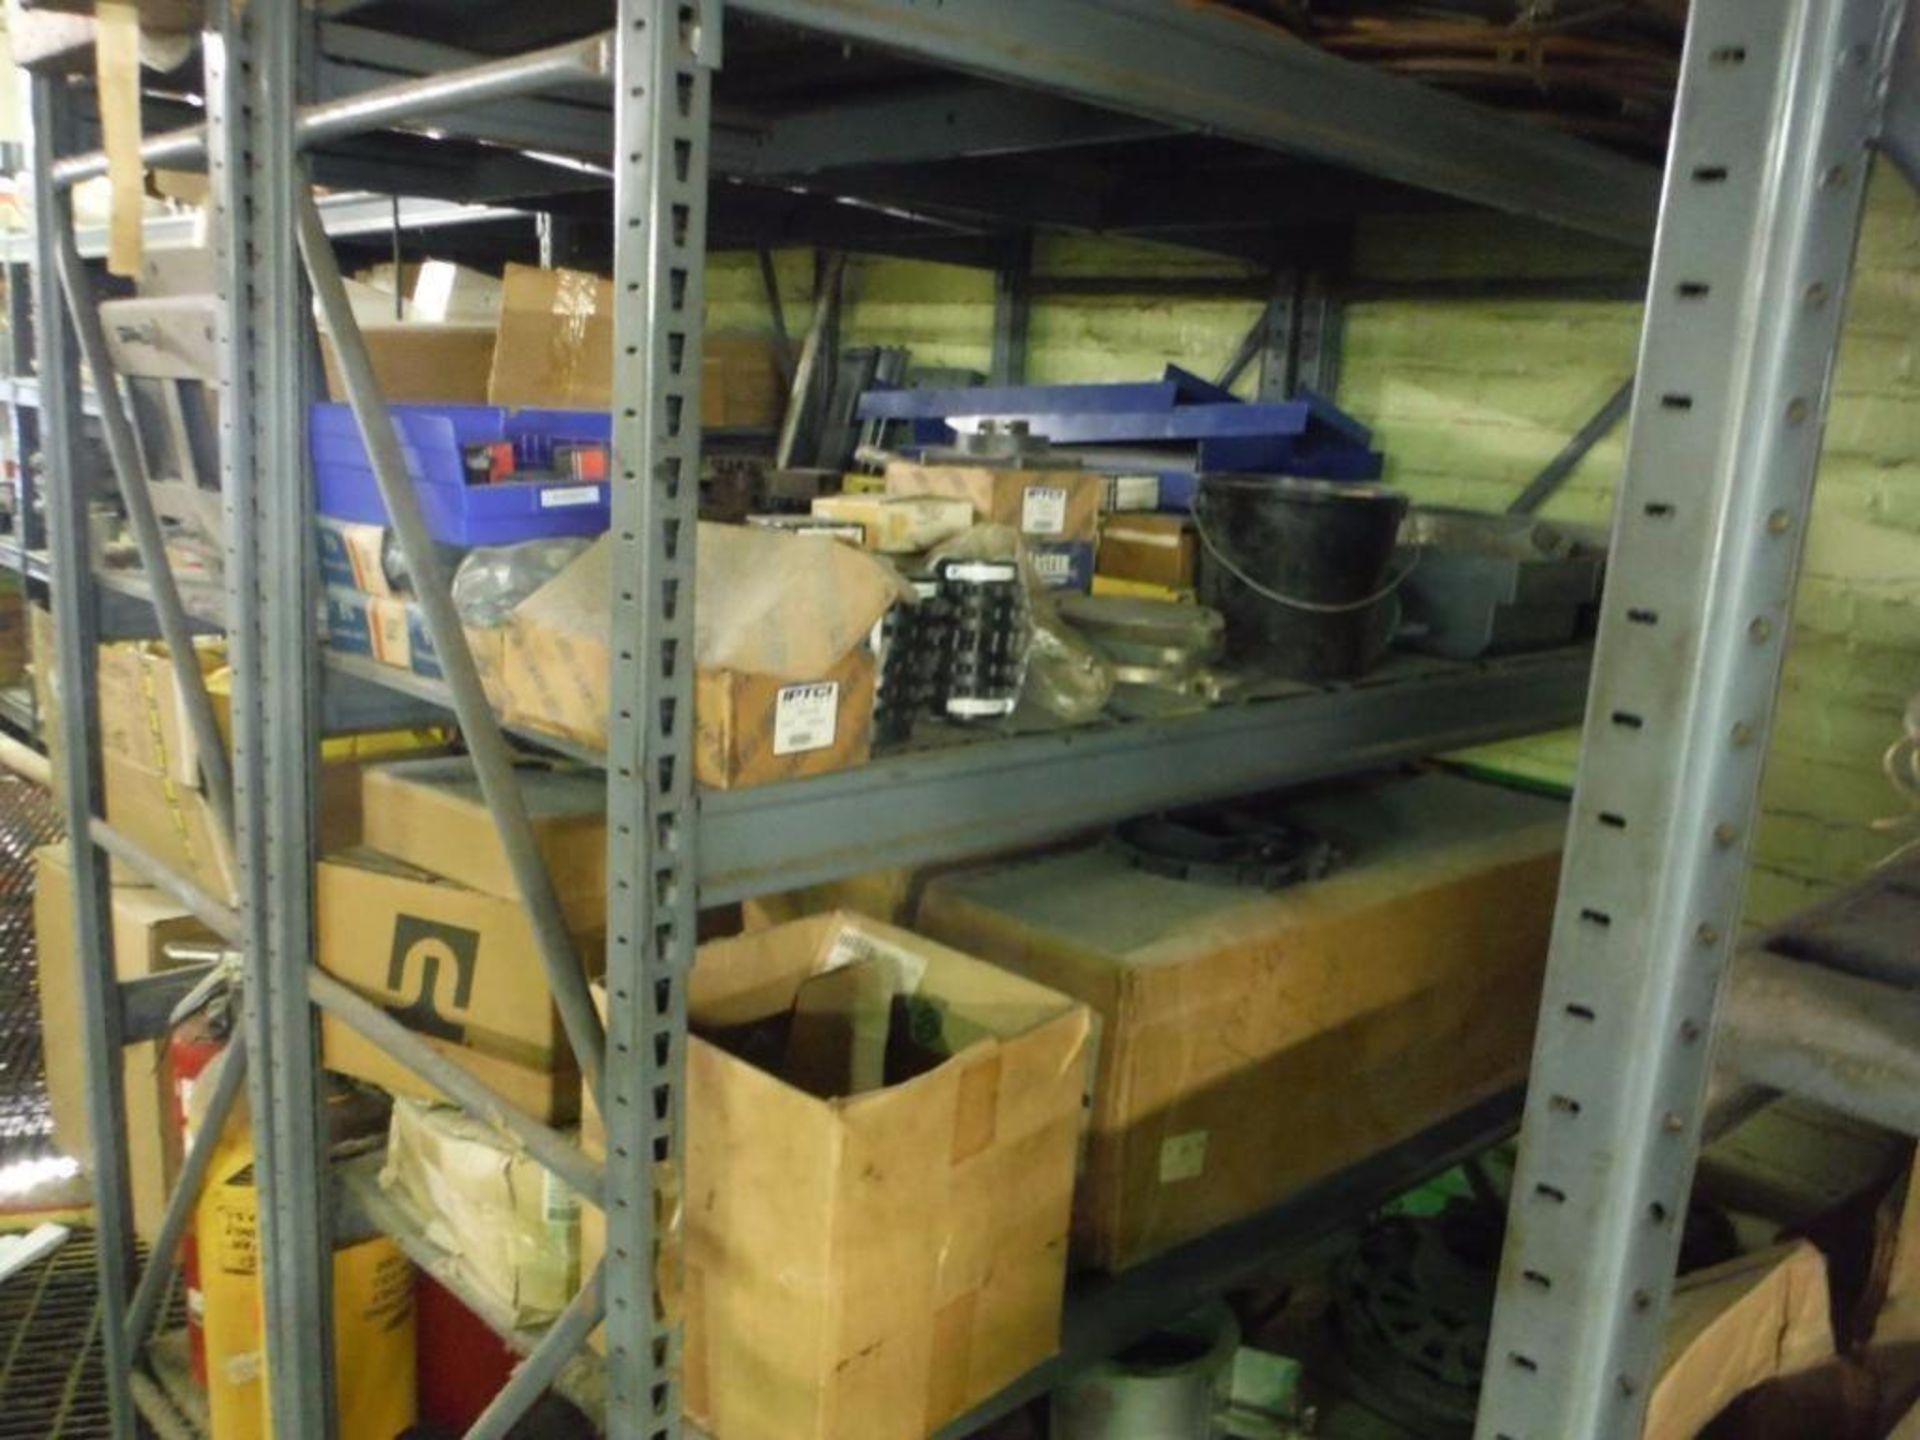 10 Shelves & content: Miscellaneous valves, fittings, brushes, and parts  Rigging Fee: $1000 - Image 13 of 14